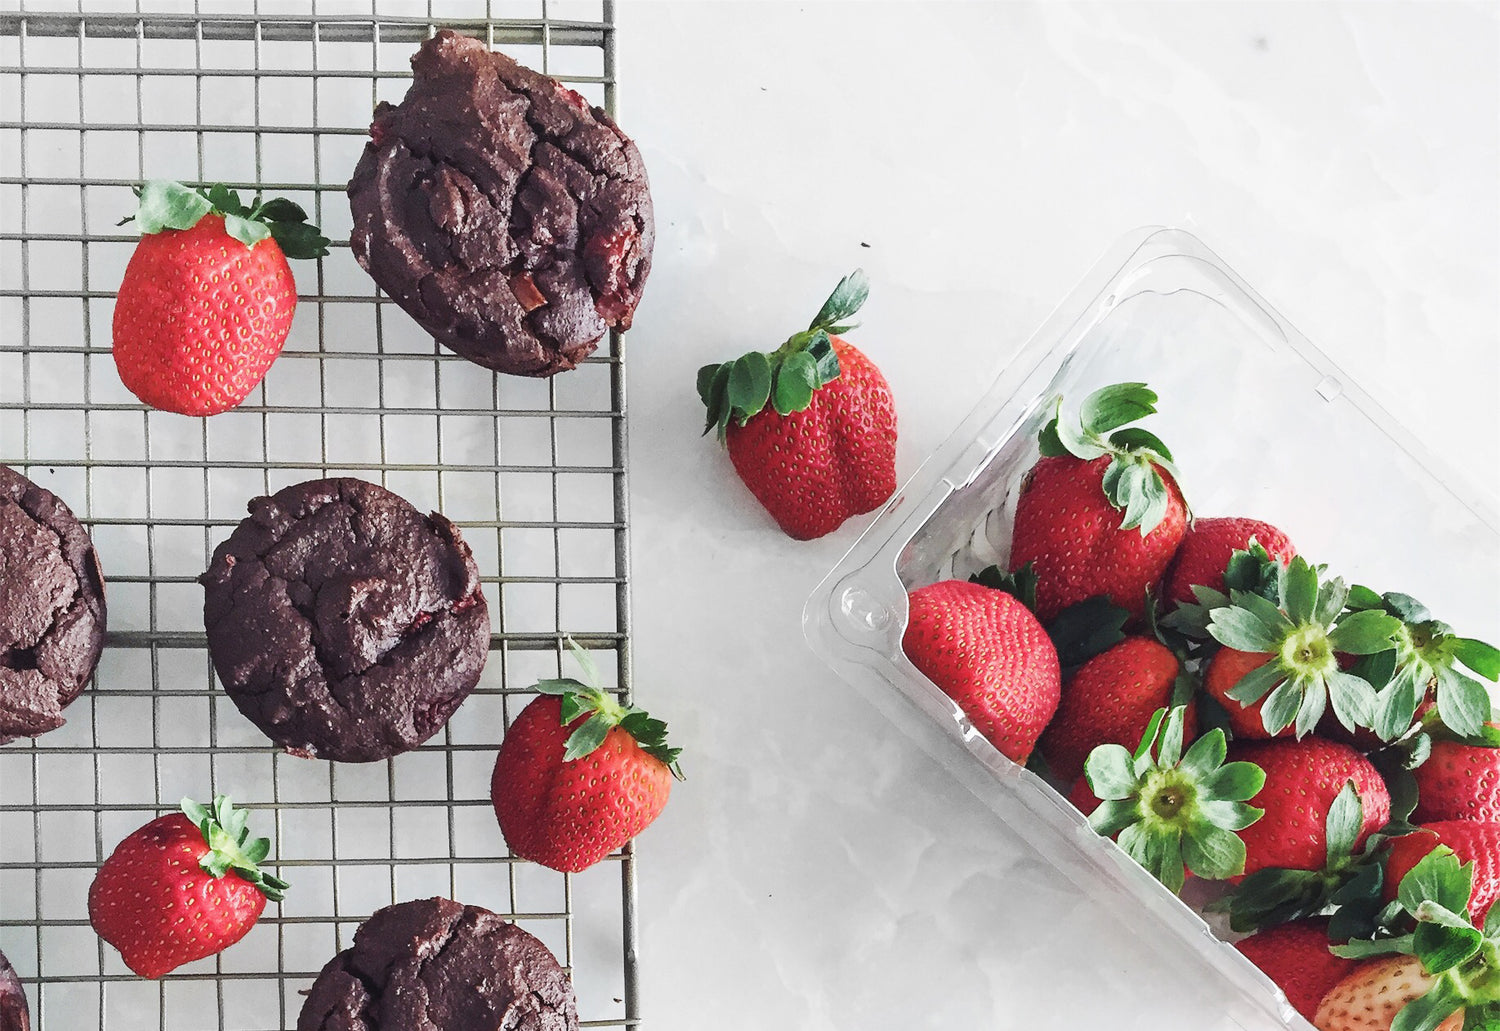 Healthy Chocolate Berry Muffins Your BAE Will Love Too